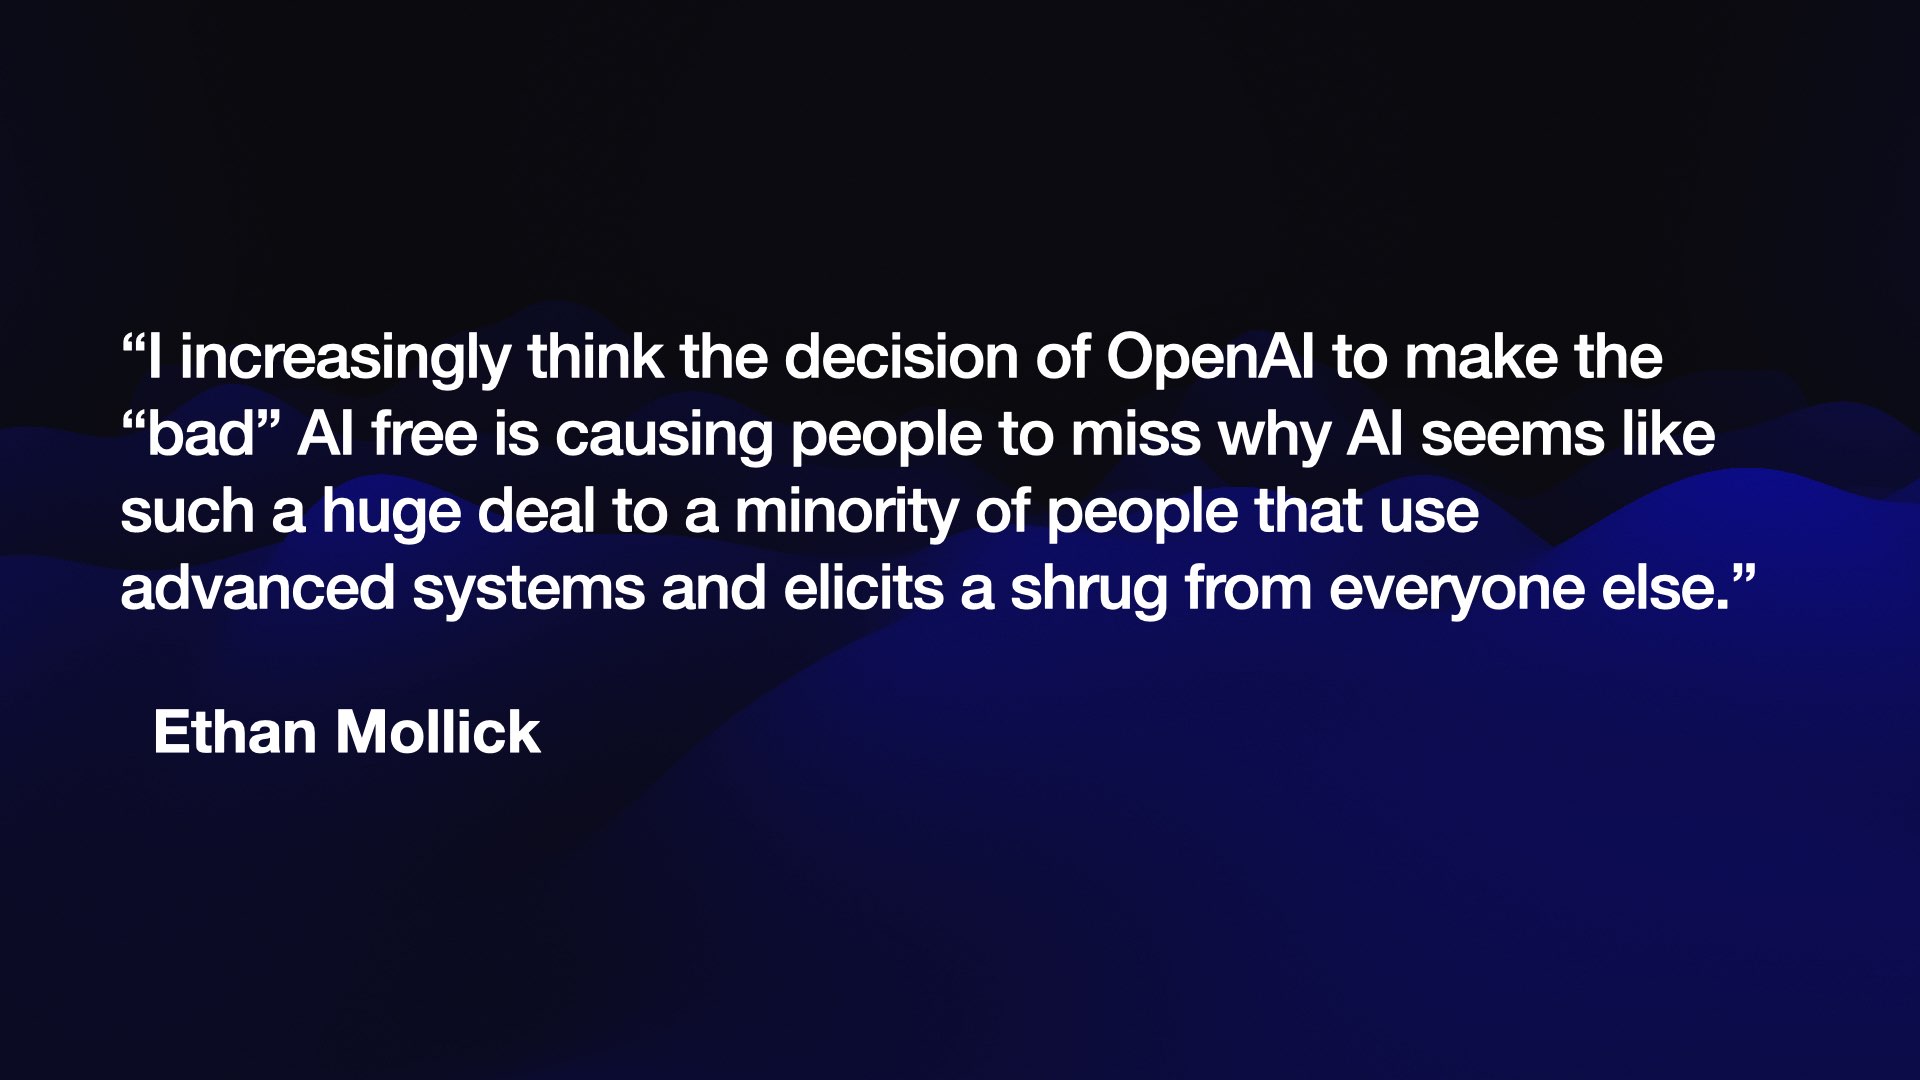 “I increasingly think the decision of OpenAI to make the “bad” AI free is causing people to miss why AI seems like such a huge deal to a minority of people that use advanced systems and elicits a shrug from everyone else.”  Ethan Mollick 